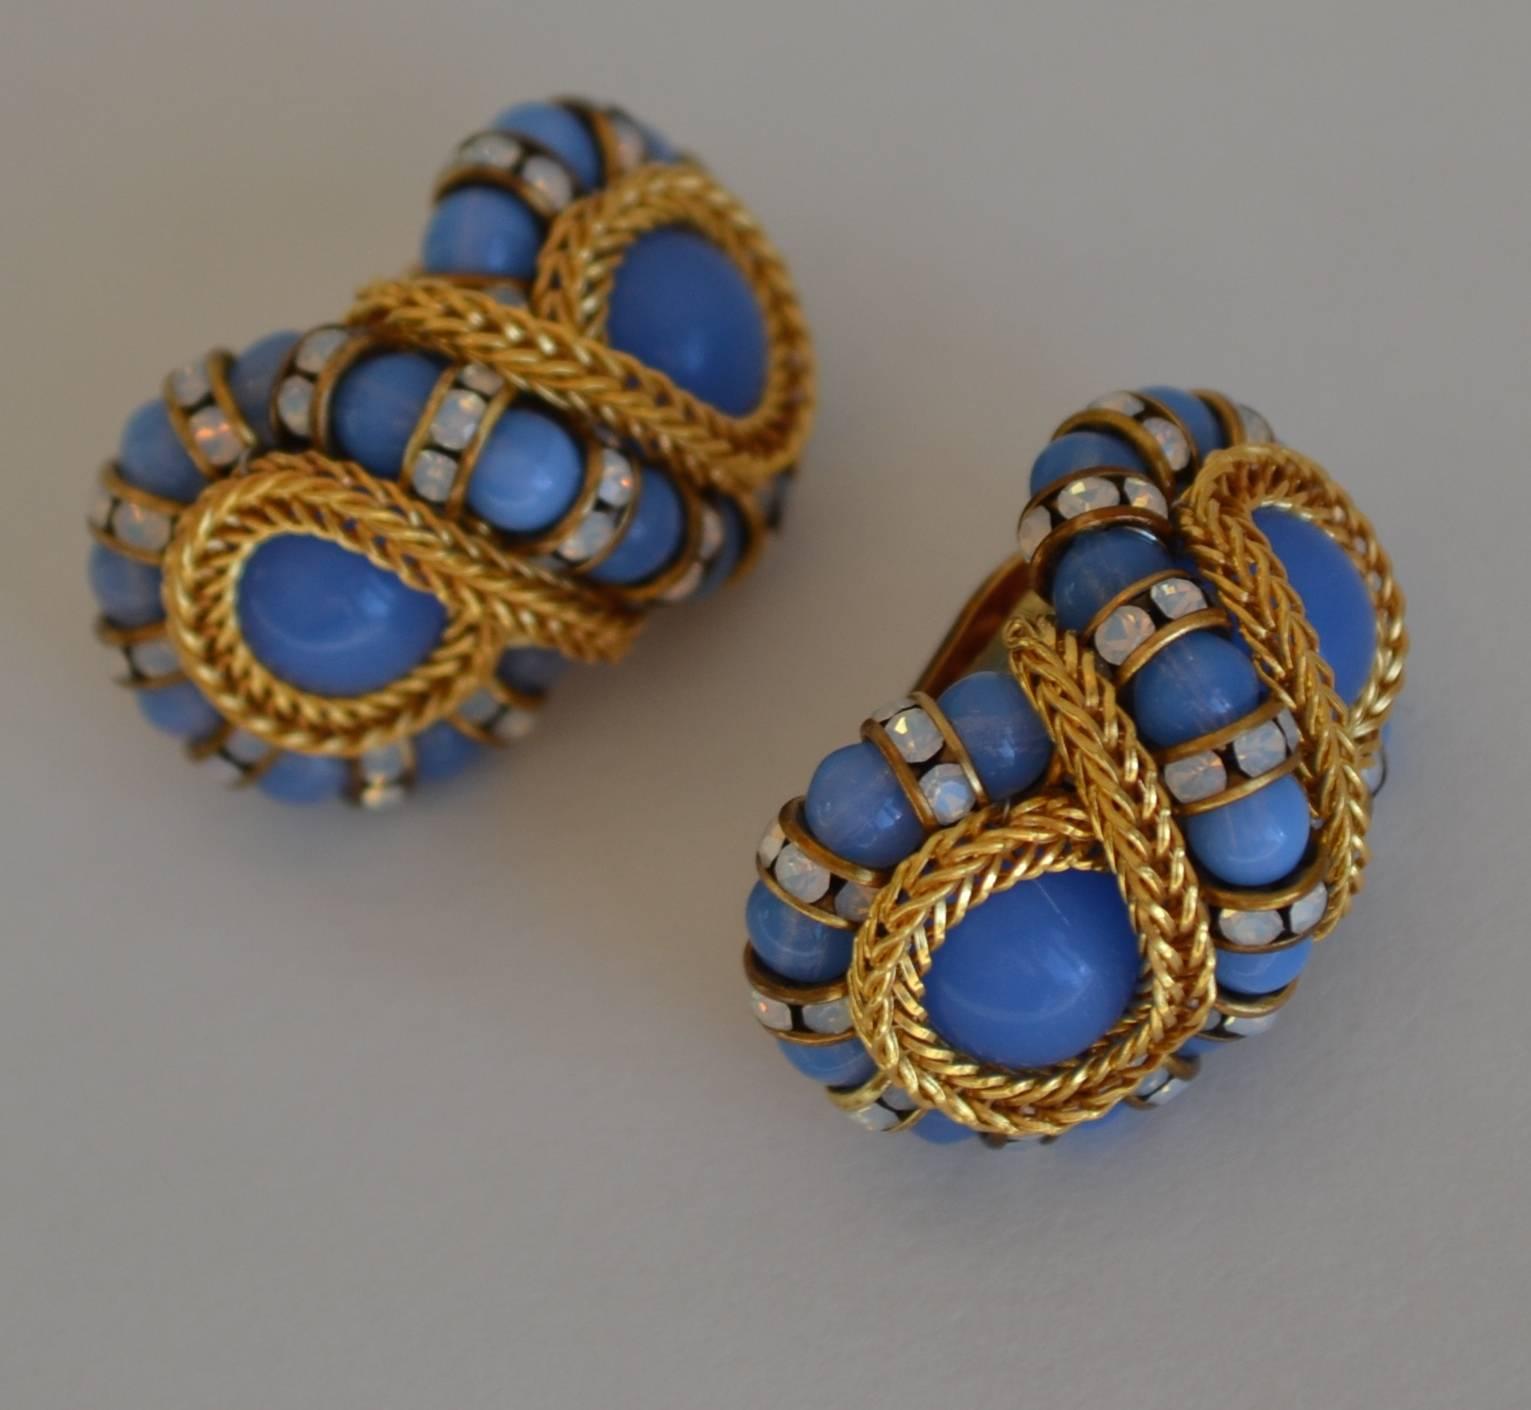 Blue clip earrings in a figure 8 shape with gold chain and Swarovski crystal rondelles from Francoise Montague.